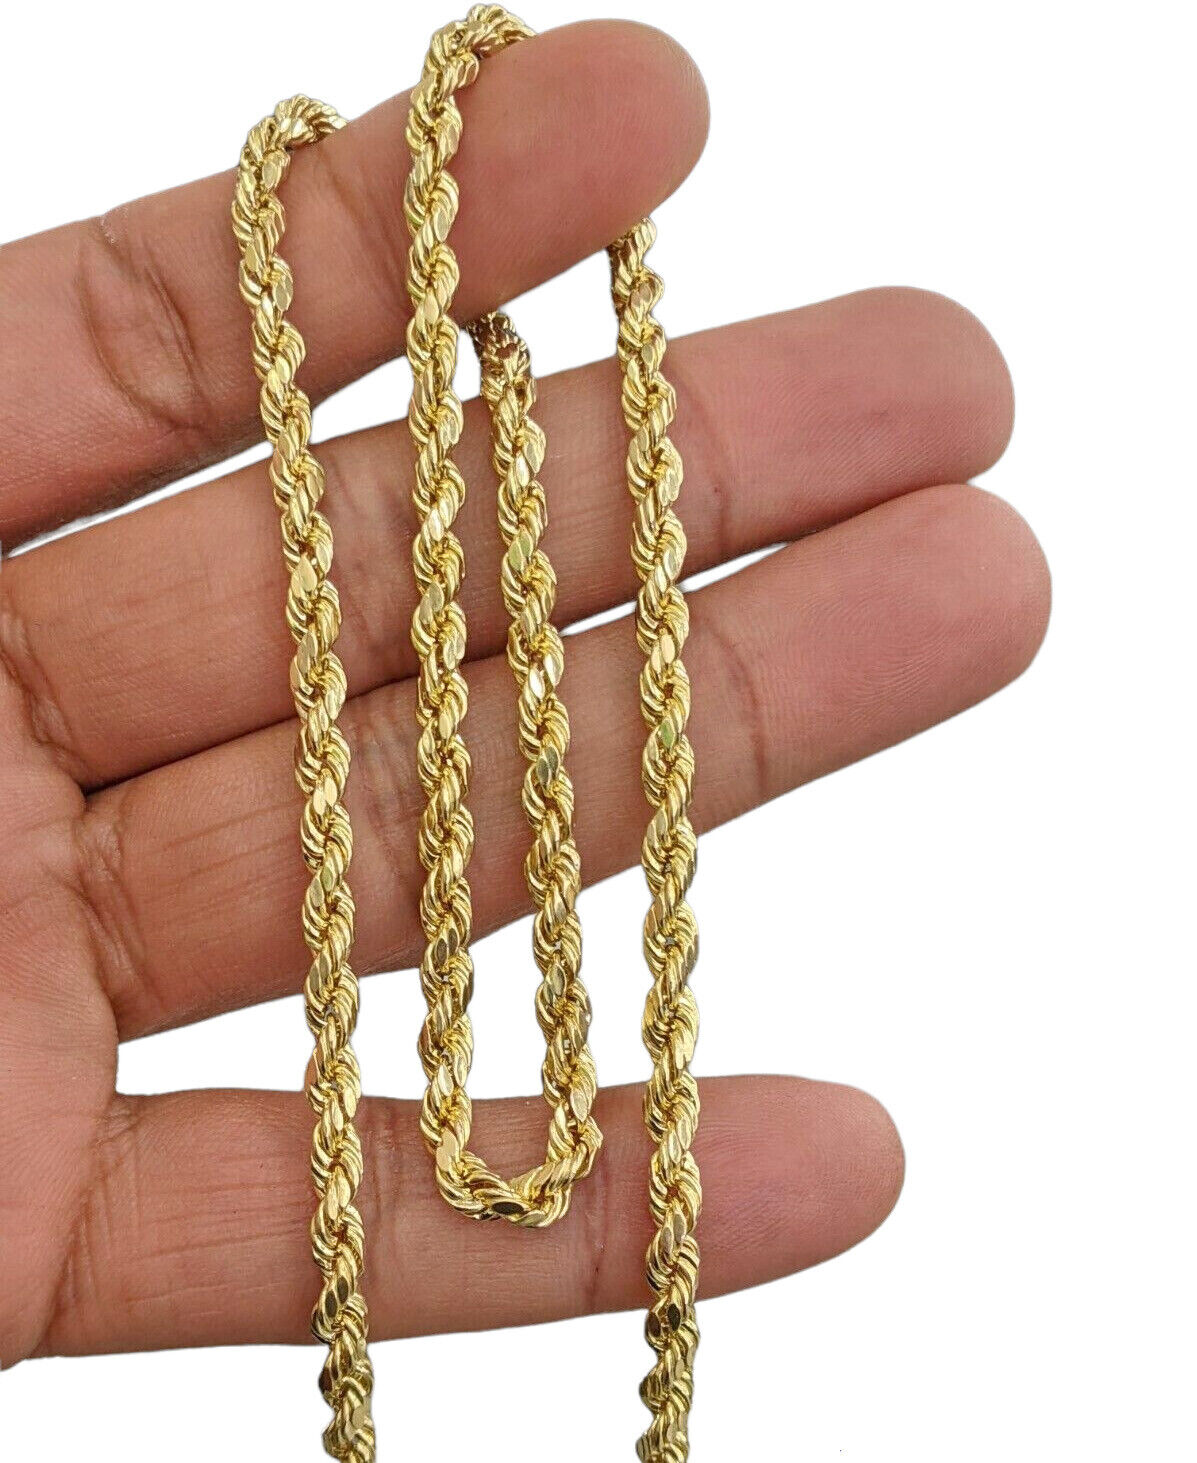 Real 10k Yellow Gold Rope Chain Necklace 4mm 18"- 30" Inch Diamond cuts 10kt